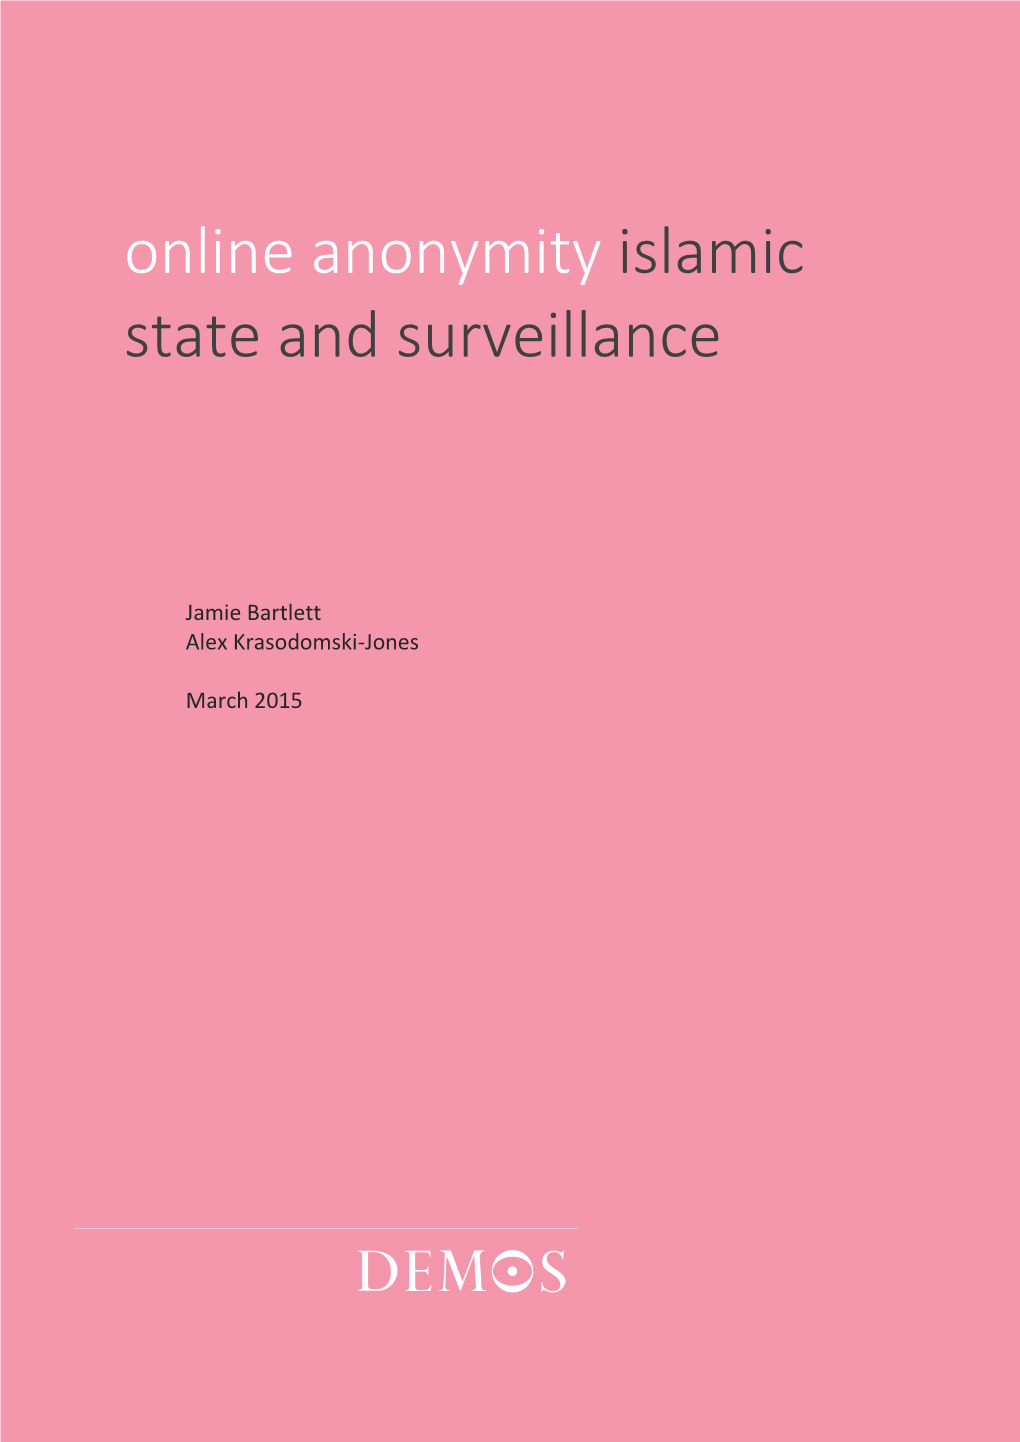 Online Anonymity Islamic State and Surveillance